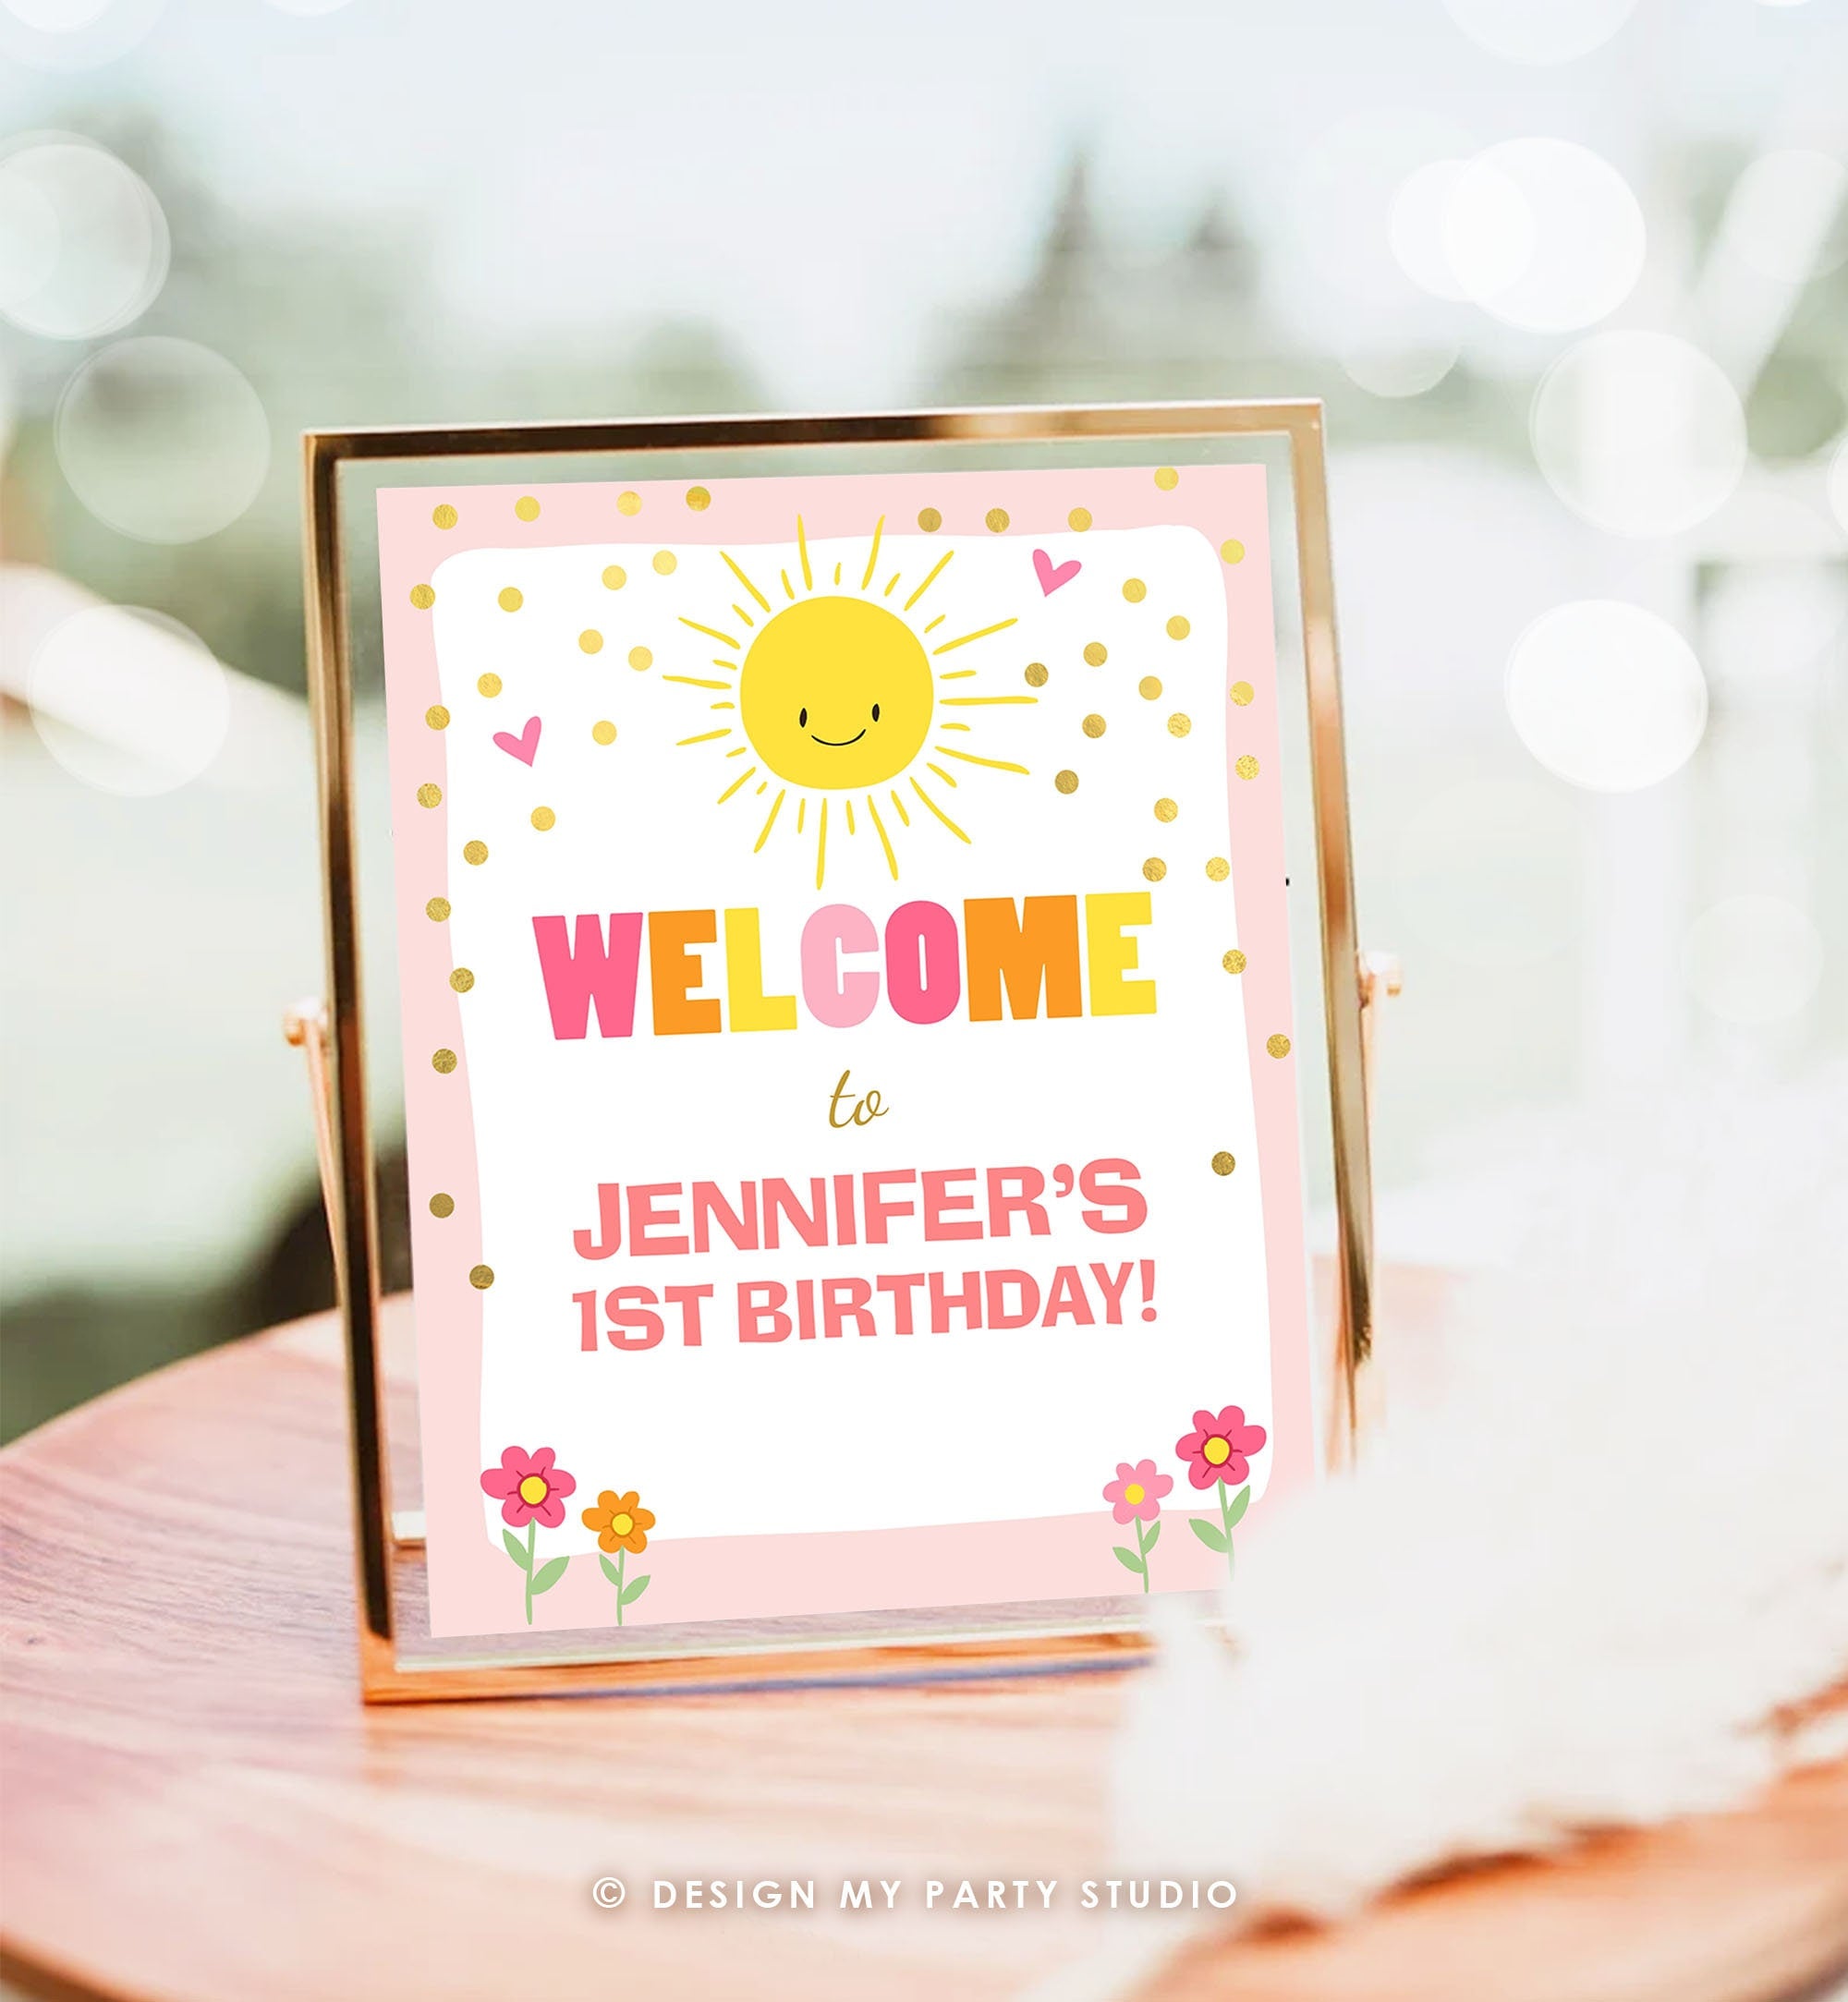 Editable Welcome Sign Sunshine Birthday Little Sunshine Party Baby Shower Welcome Pink and Gold Girl Summer Template PRINTABLE Corjl 0070